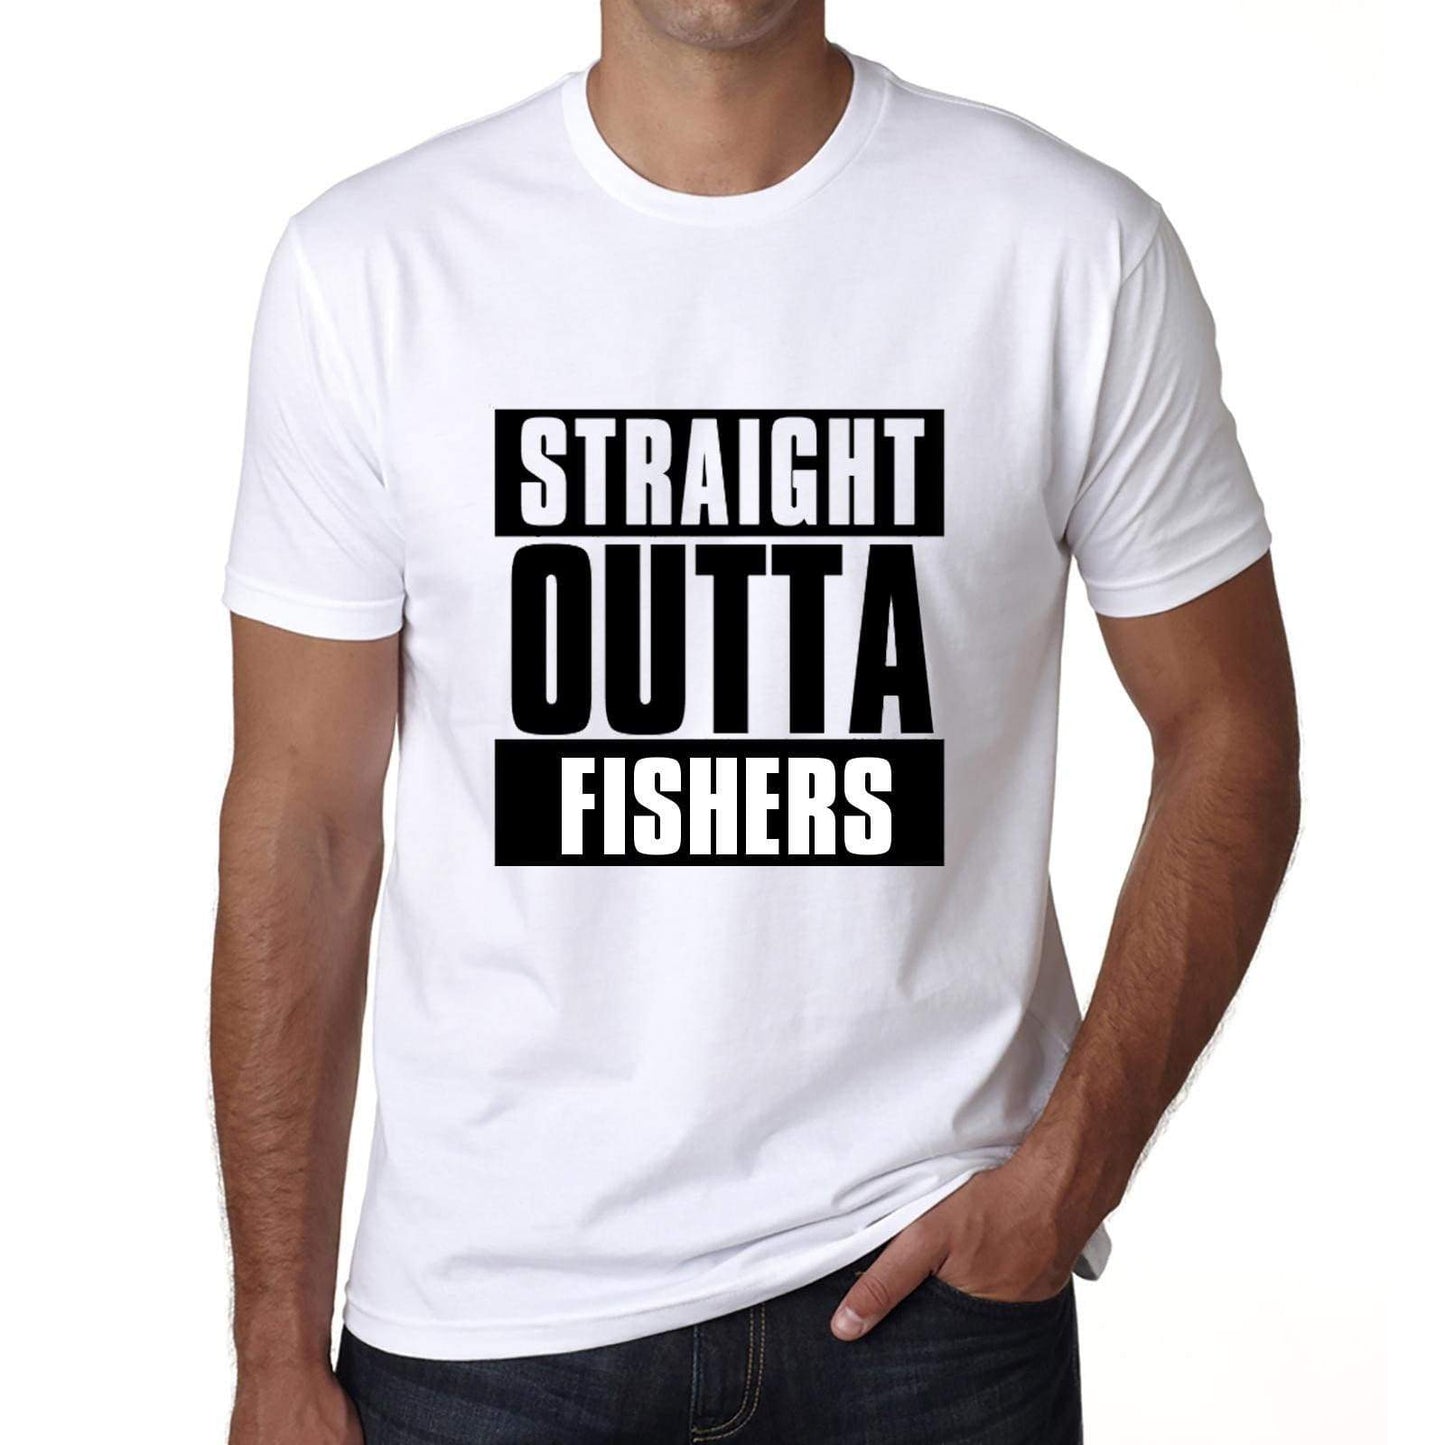 Straight Outta Fishers Mens Short Sleeve Round Neck T-Shirt 00027 - White / S - Casual